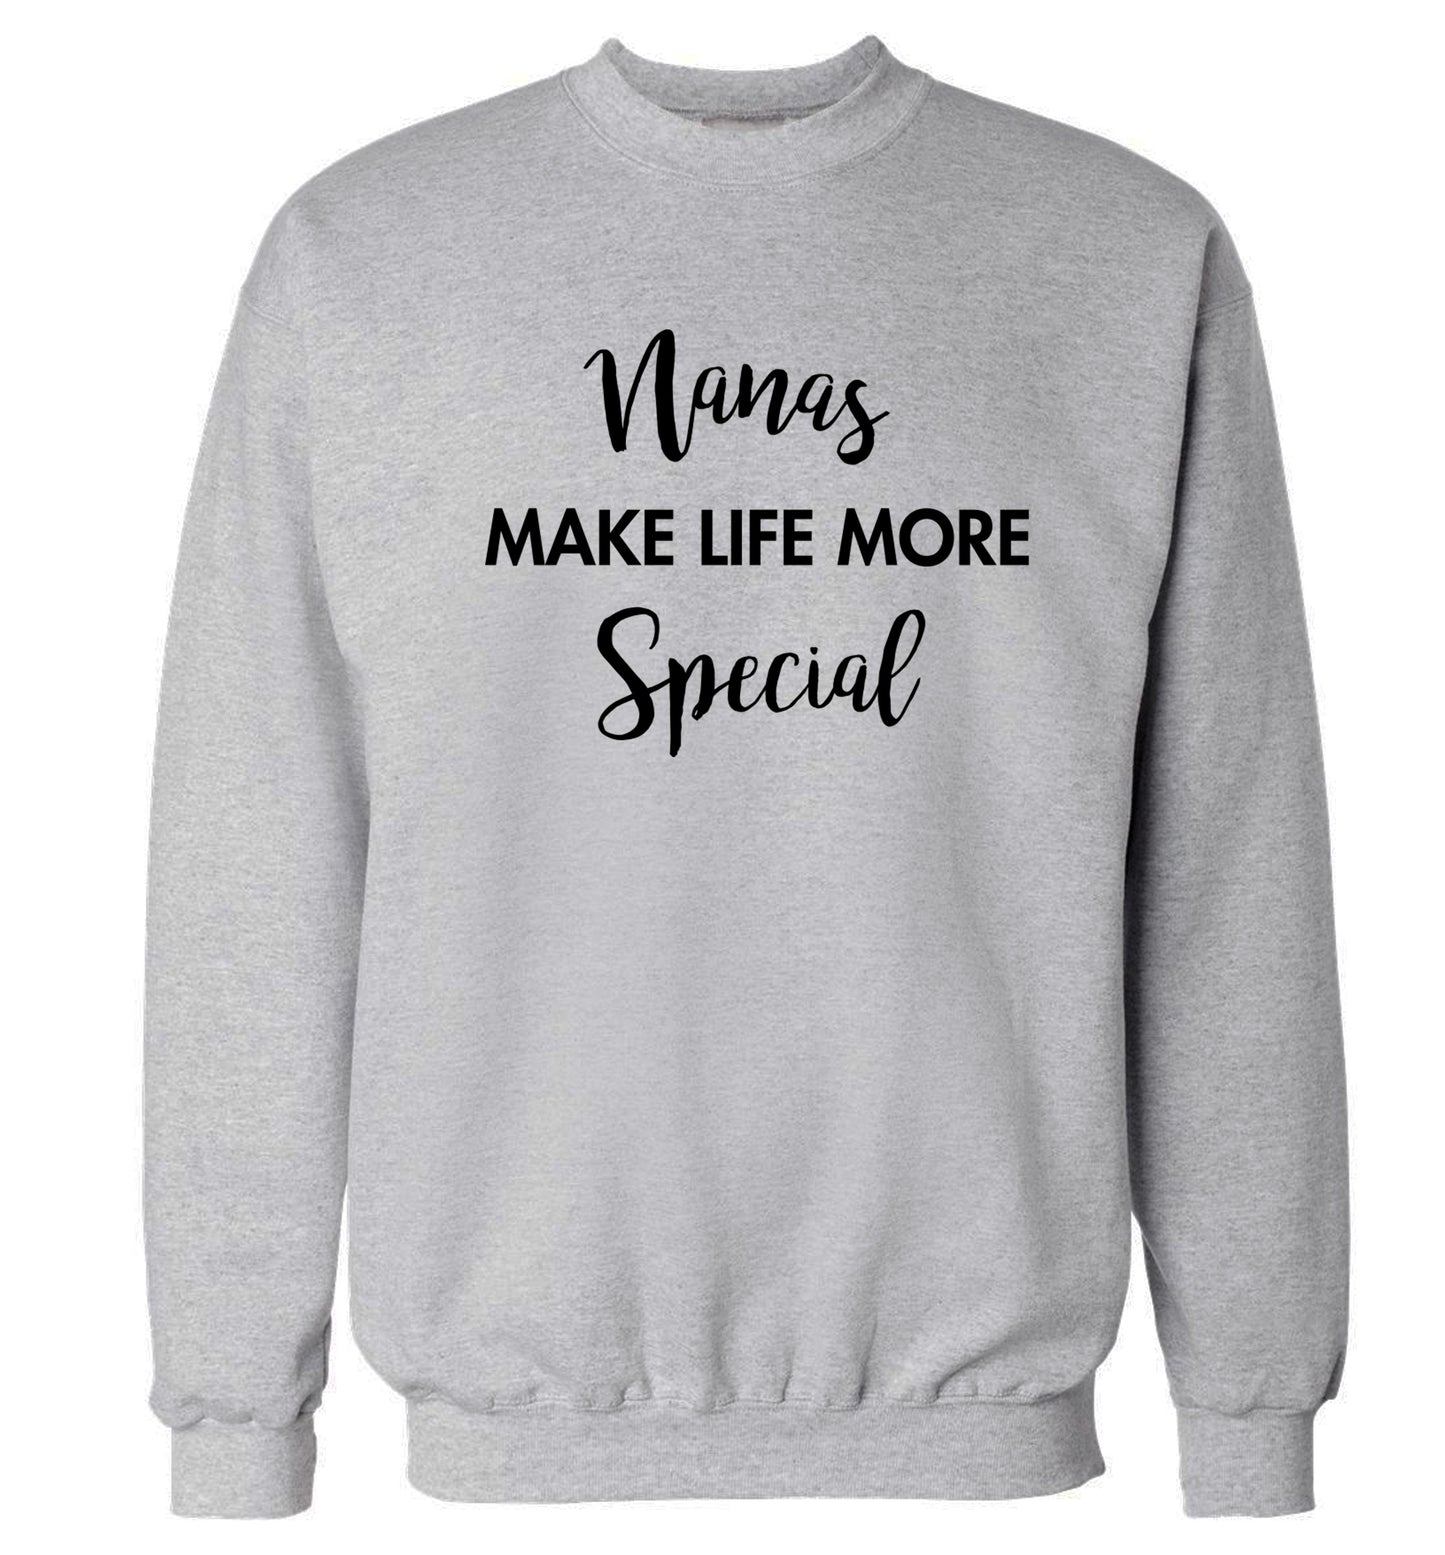 Nanas make life more special Adult's unisex grey Sweater 2XL